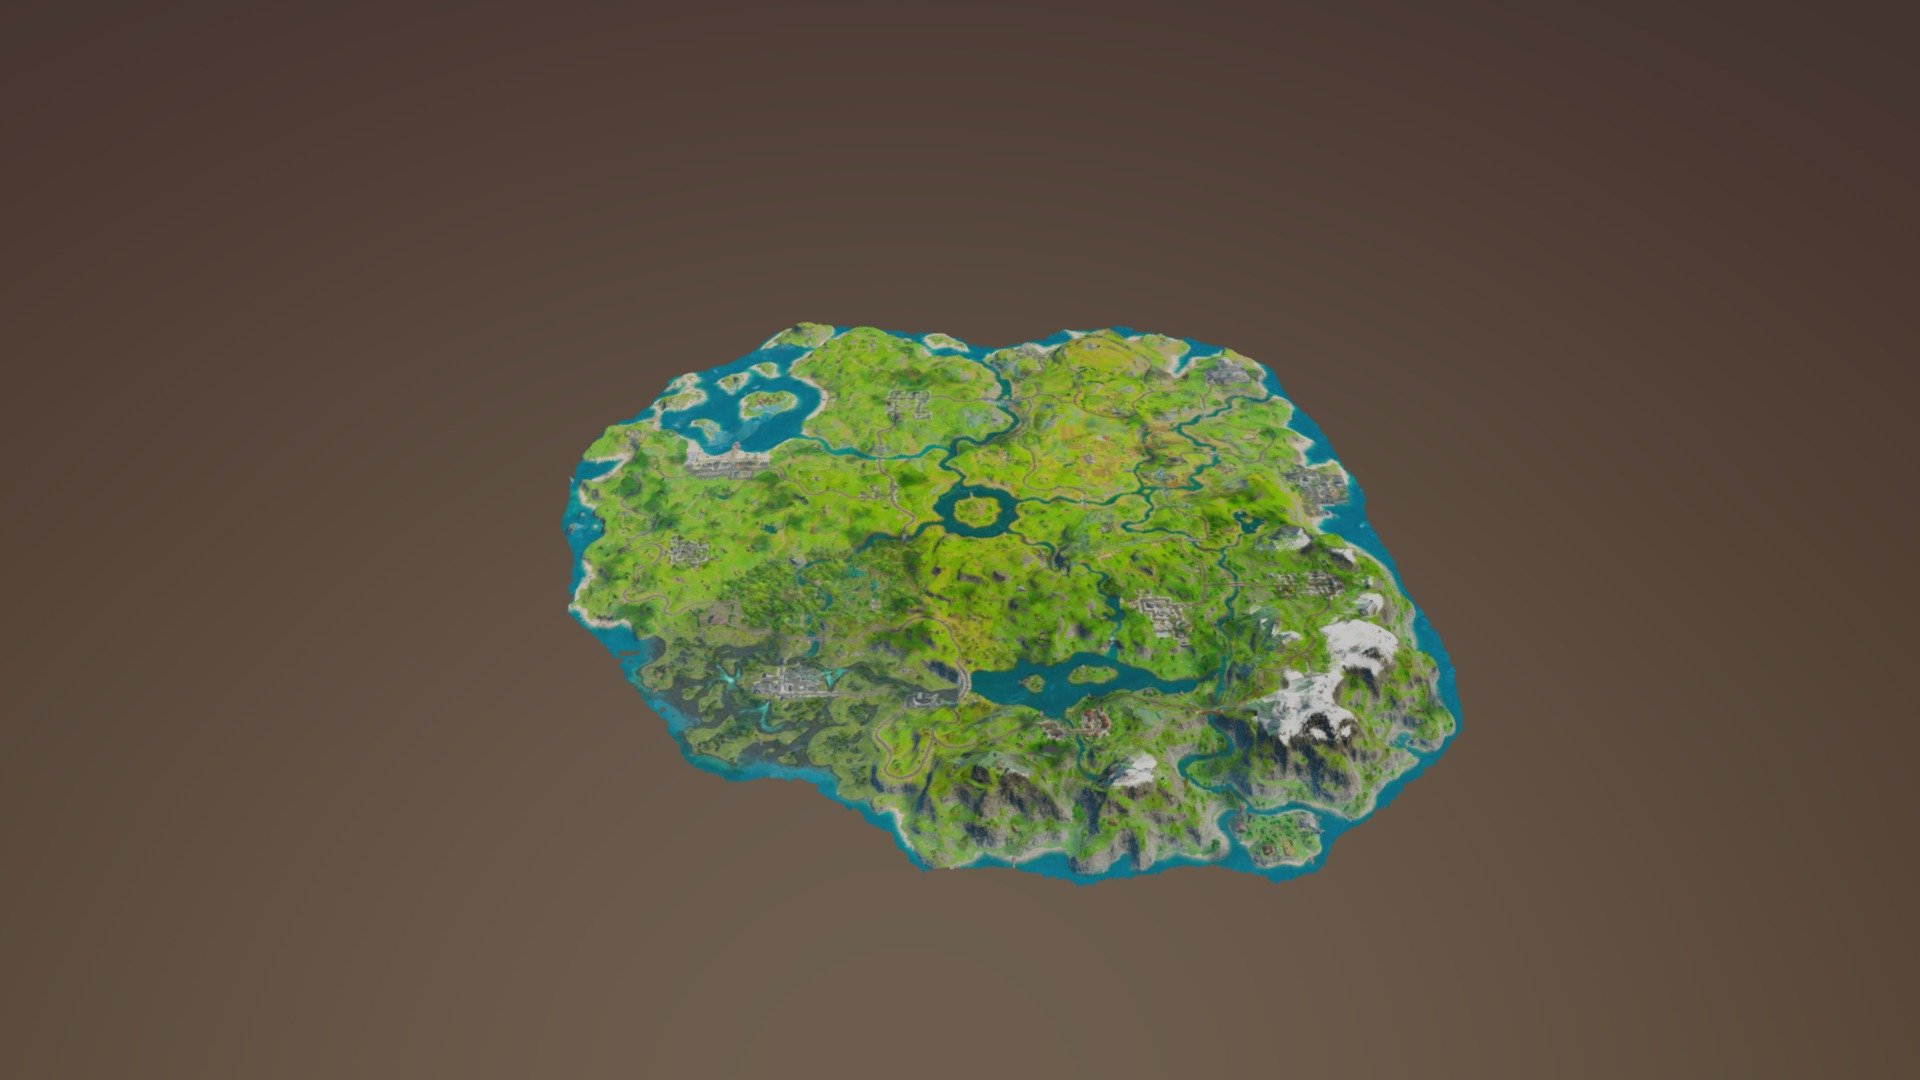 Fortnite Map 360 View Fortnite Chapter 2 Map 3d Scan Download Free 3d Model By Stoney0229 Stoney0229 194a736